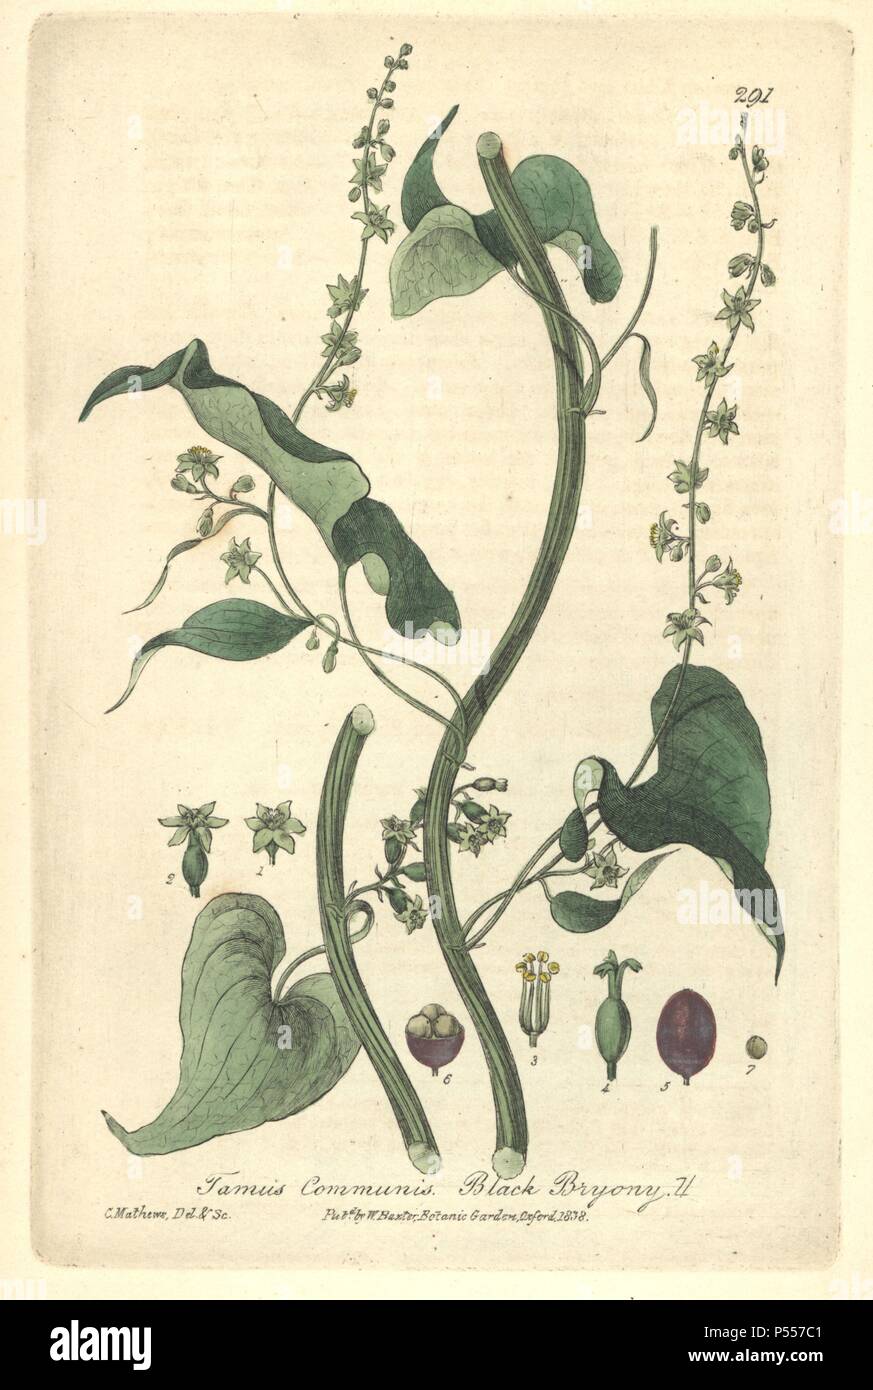 Black bryony, Tamus communis. Handcoloured copperplate drawn and engraved by Charles Mathews from William Baxter's 'British Phaenogamous Botany,' Oxford, 1838. Scotsman William Baxter (1788-1871) was the curator of the Oxford Botanic Garden from 1813 to 1854. Stock Photo